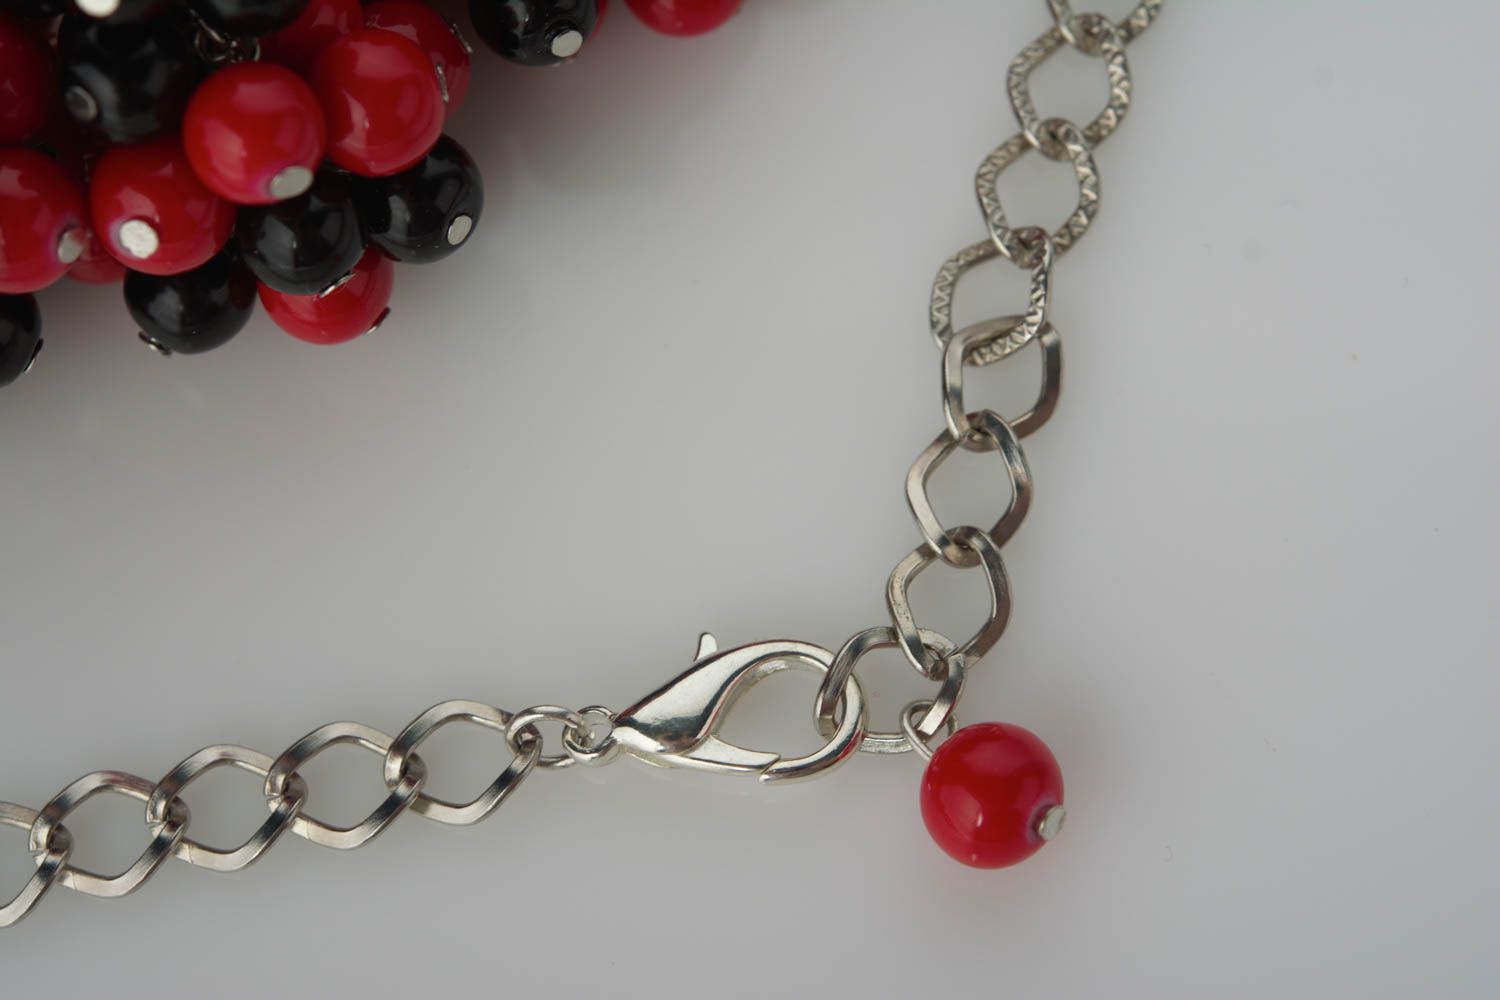 Handmade necklace made of ceramic beads on metal chain red and black stylish jewelry photo 5